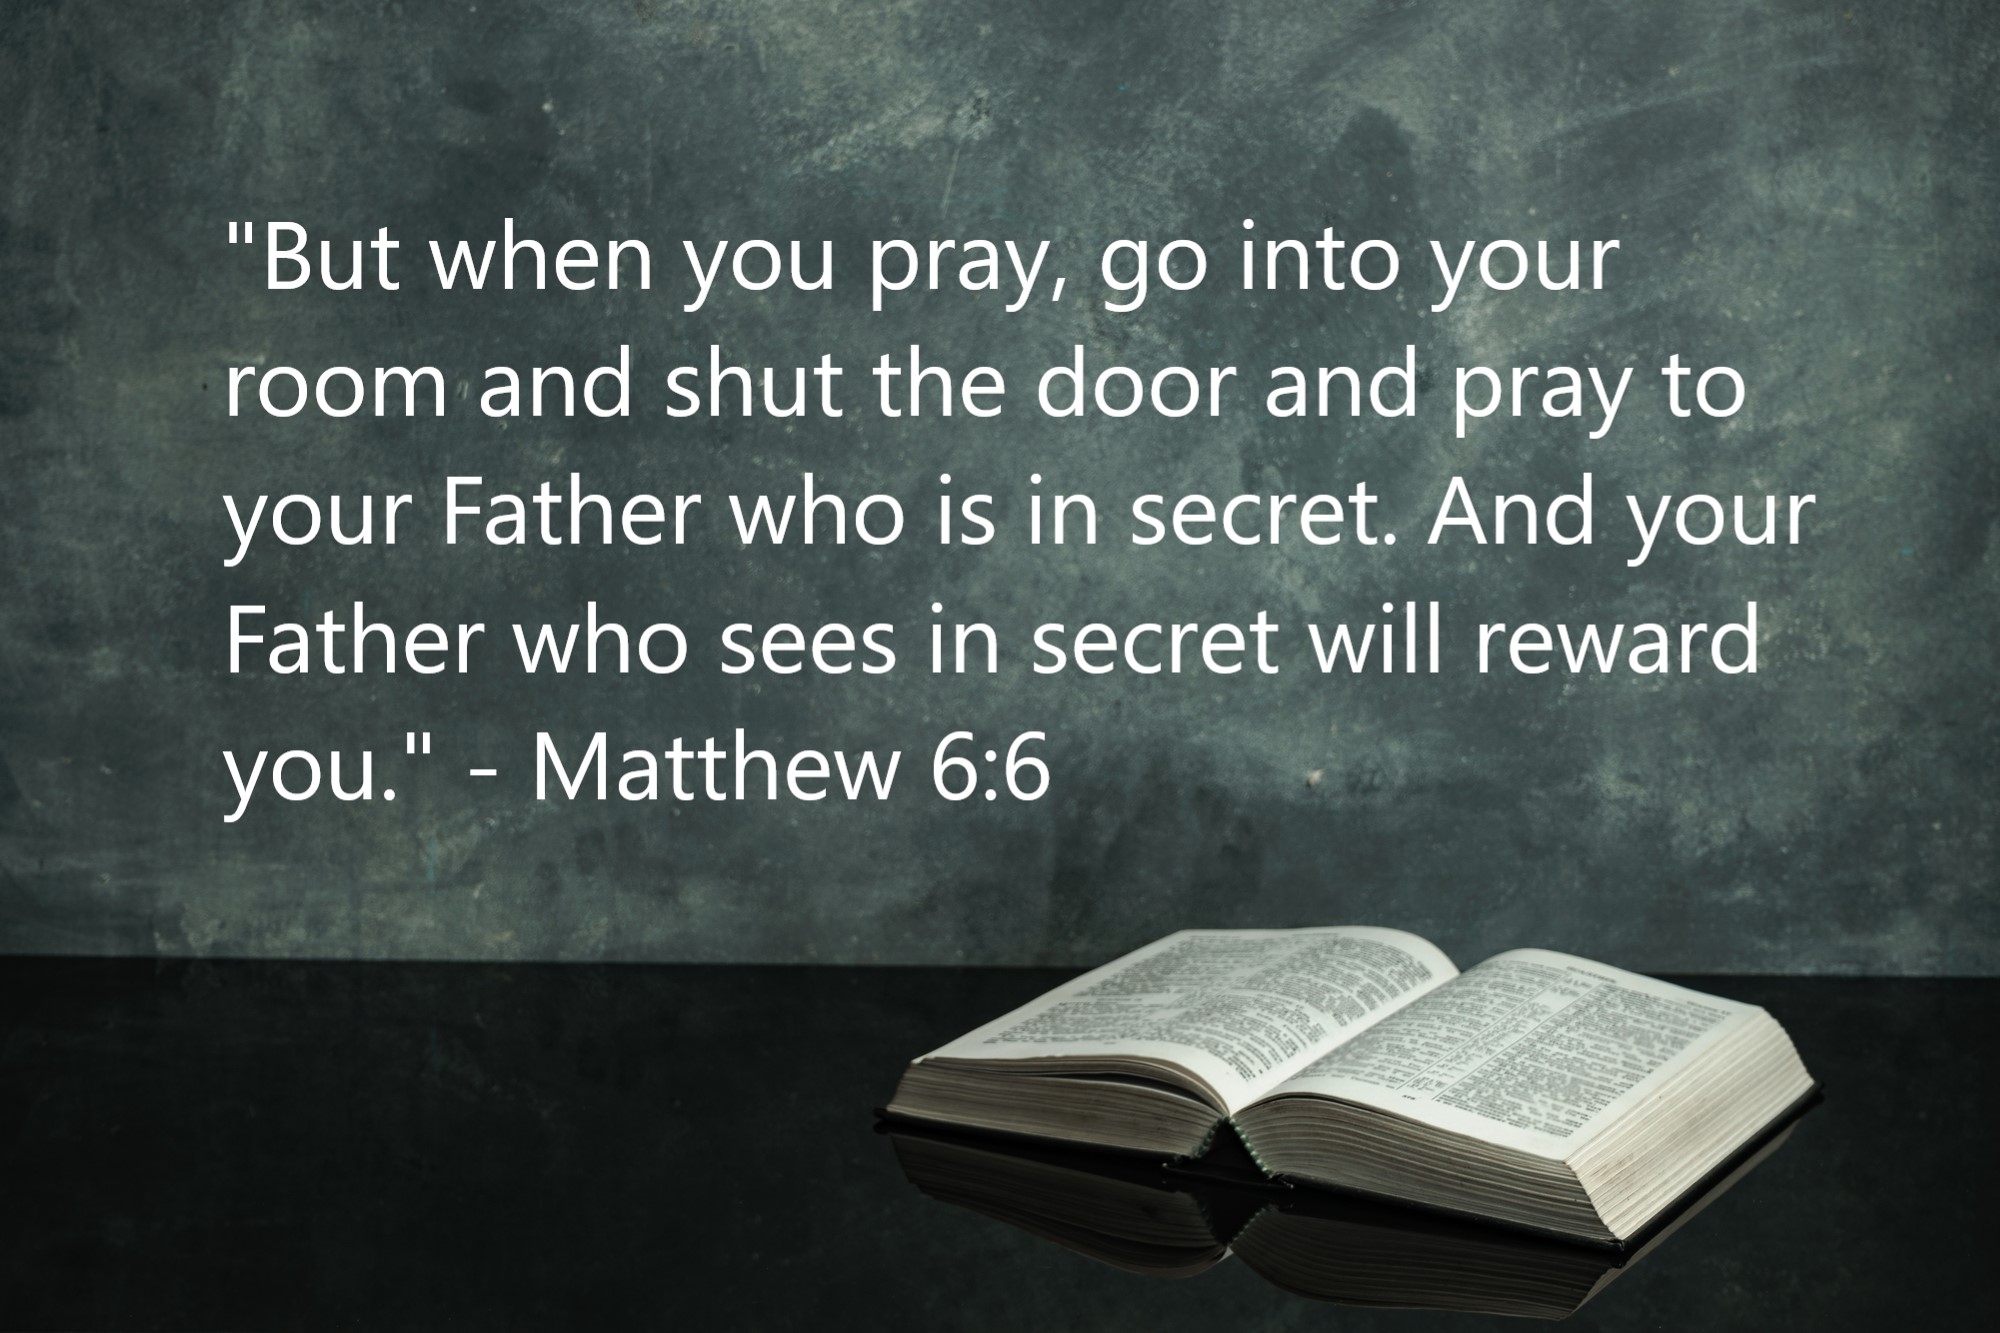 "But when you pray, go into your room and shut the door and pray to your Father who is in secret. And your Father who sees in secret will reward you." - Matthew 6:6